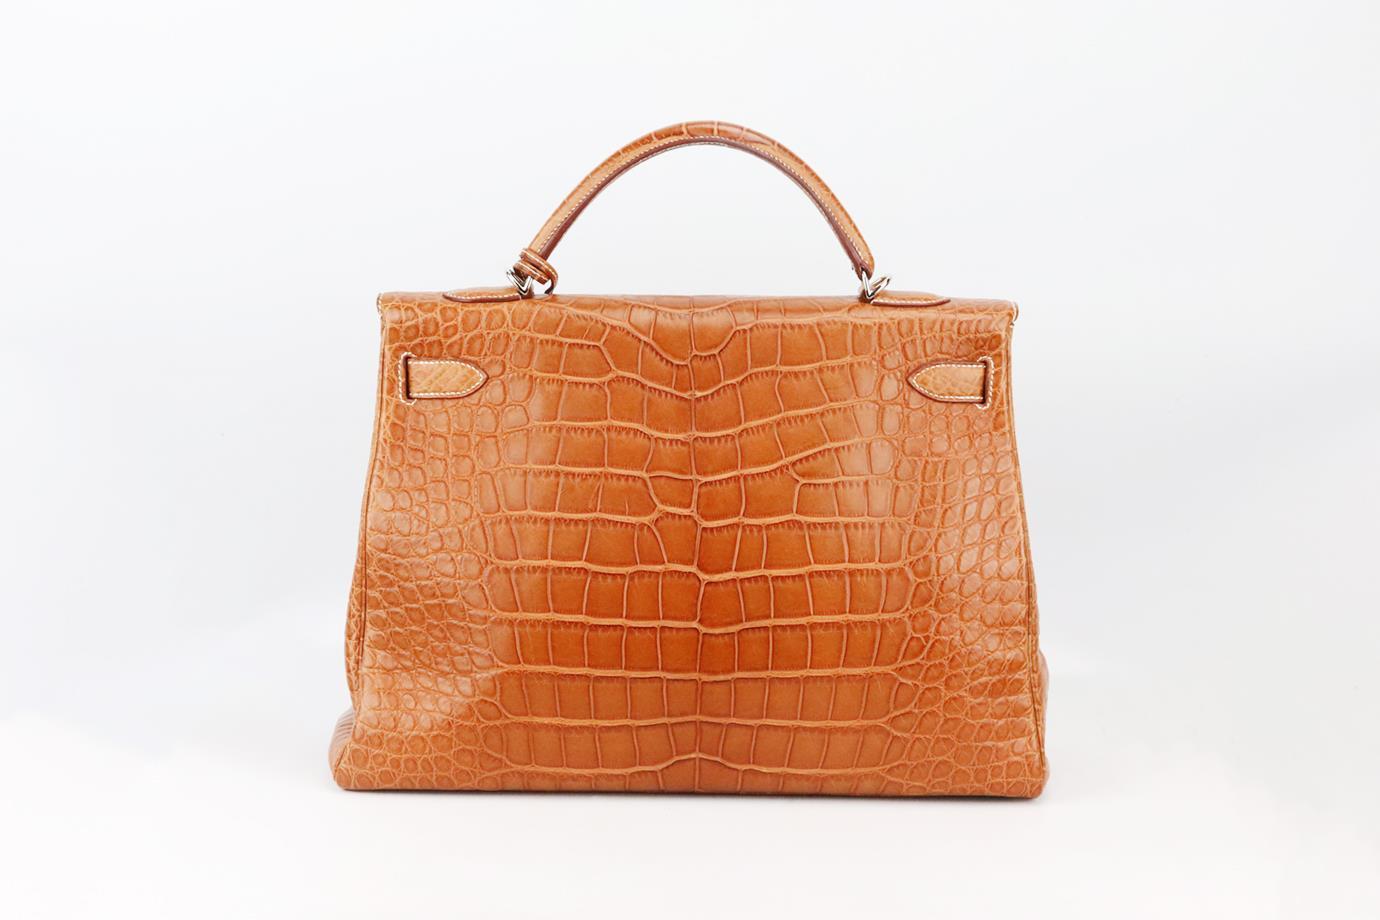 Hermès 2010 Kelly 40cm Matte Alligator Mississippiensis Leather Bag In Excellent Condition For Sale In London, GB